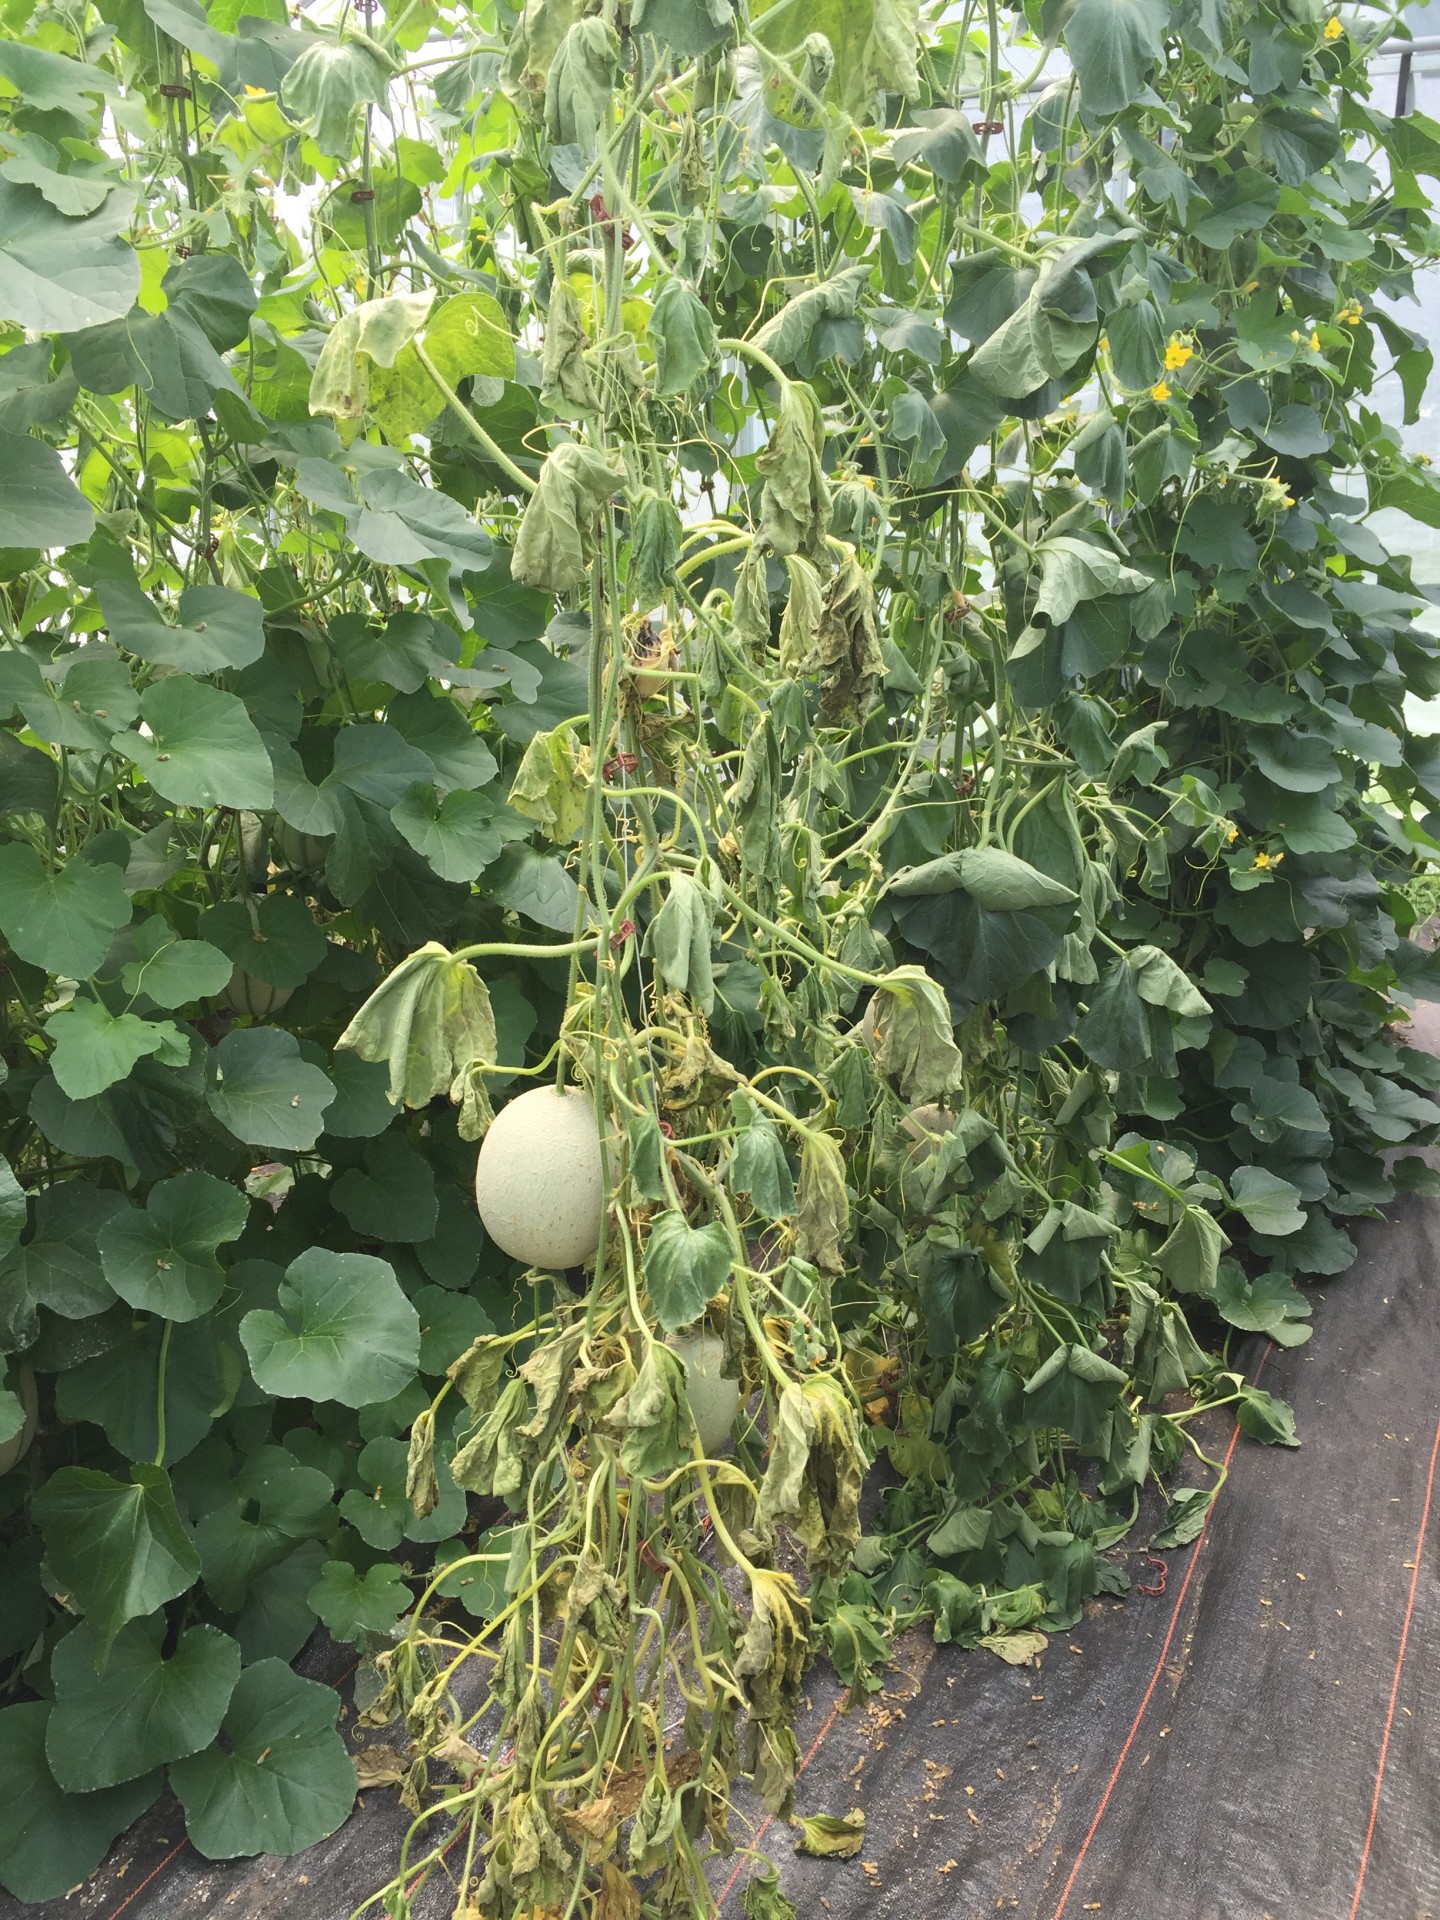 Tunnel Evaluation of Vertically-Grown and Galia Melon Varieties | Purdue Crops Hotline